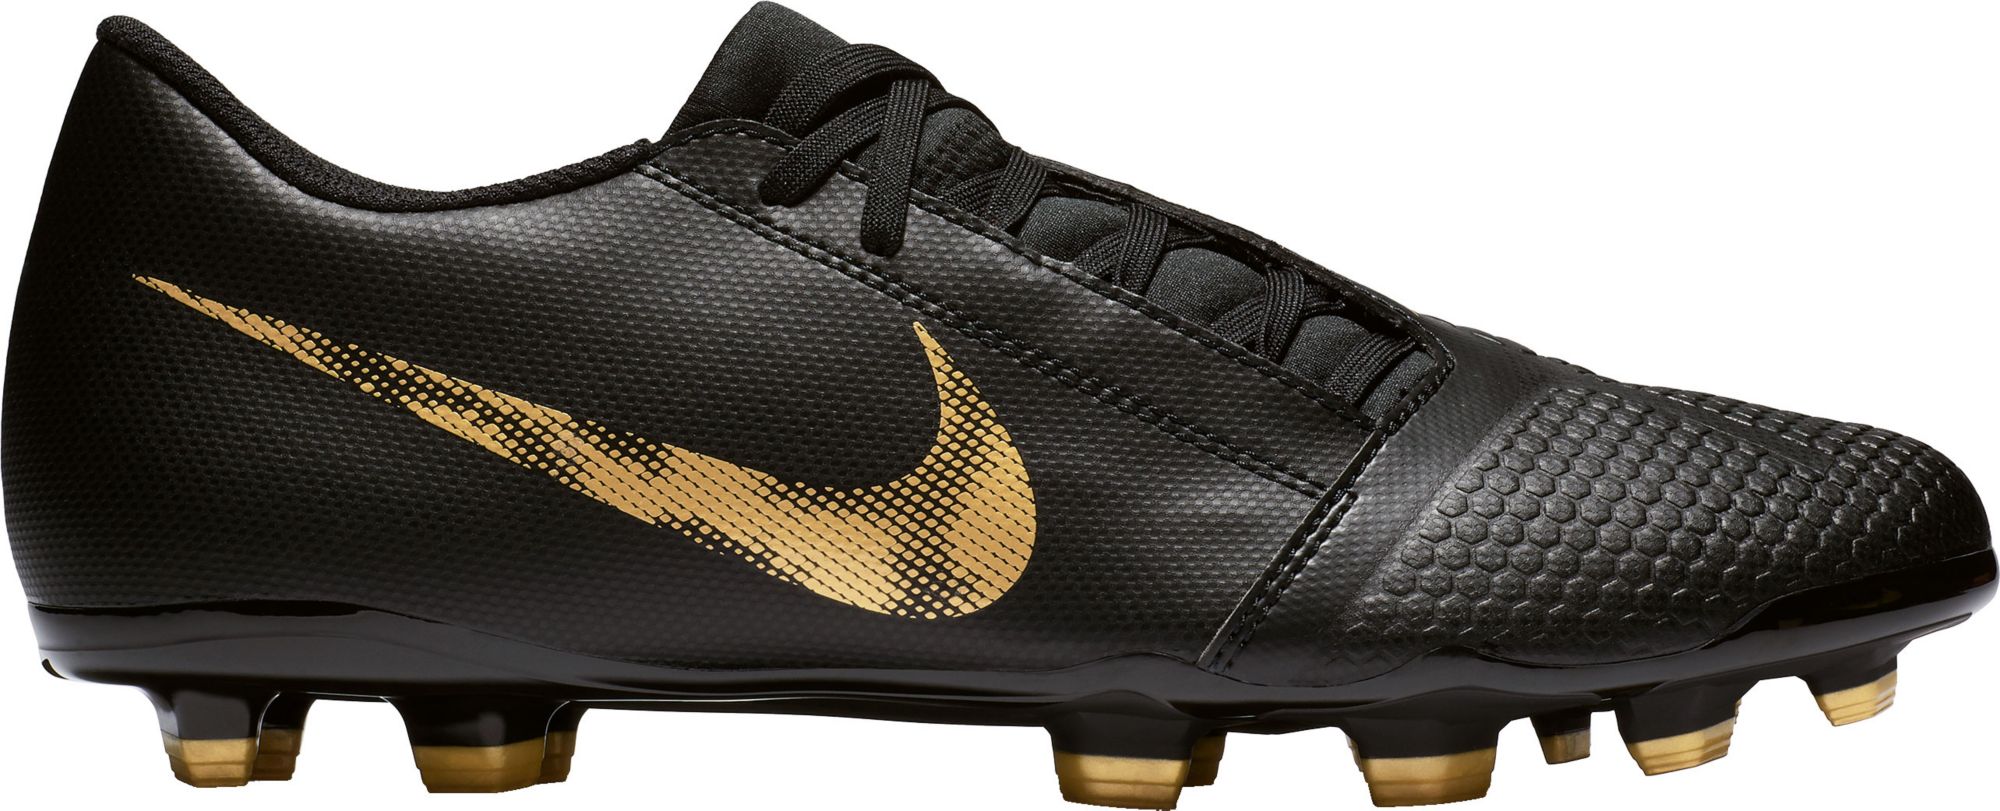 black and gold nike soccer boots